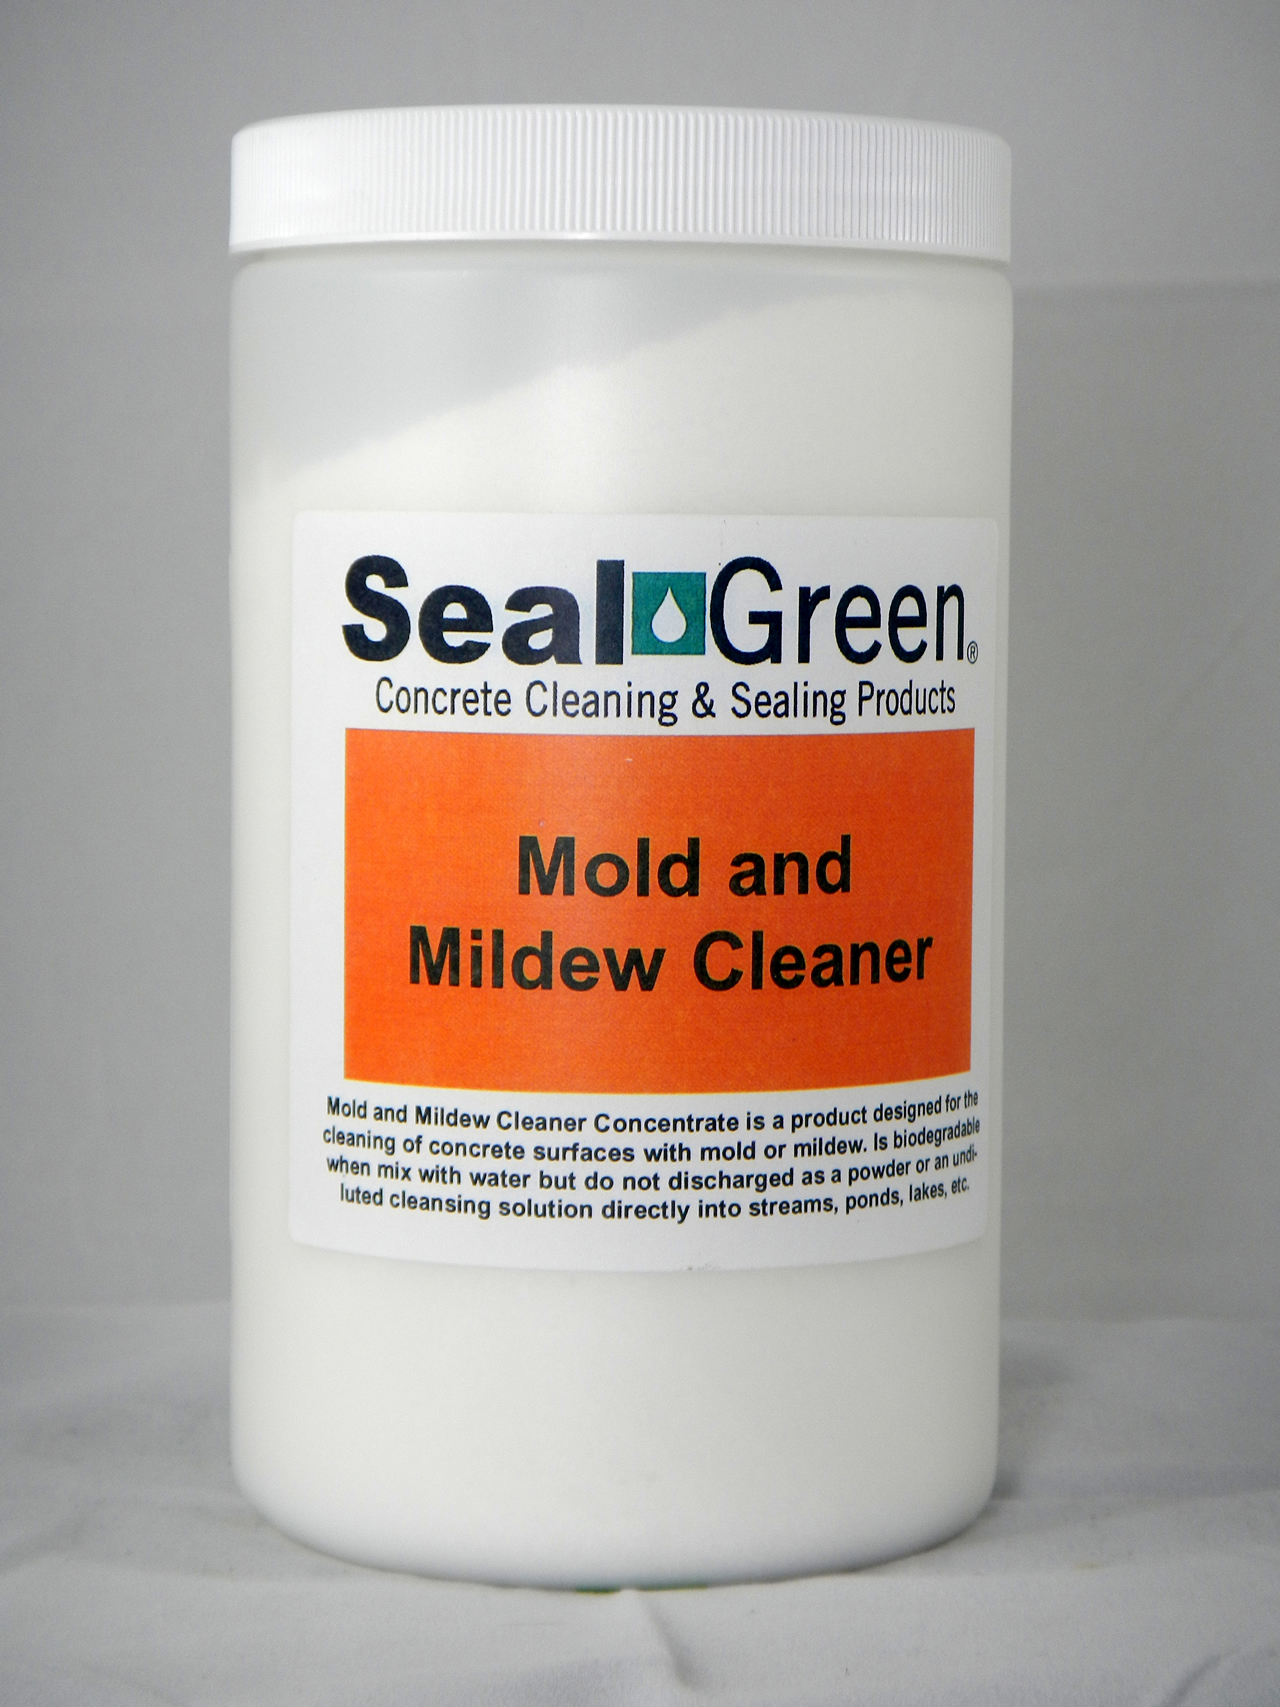 Mold and Mildew Cleaner for Concrete Questions & Answers